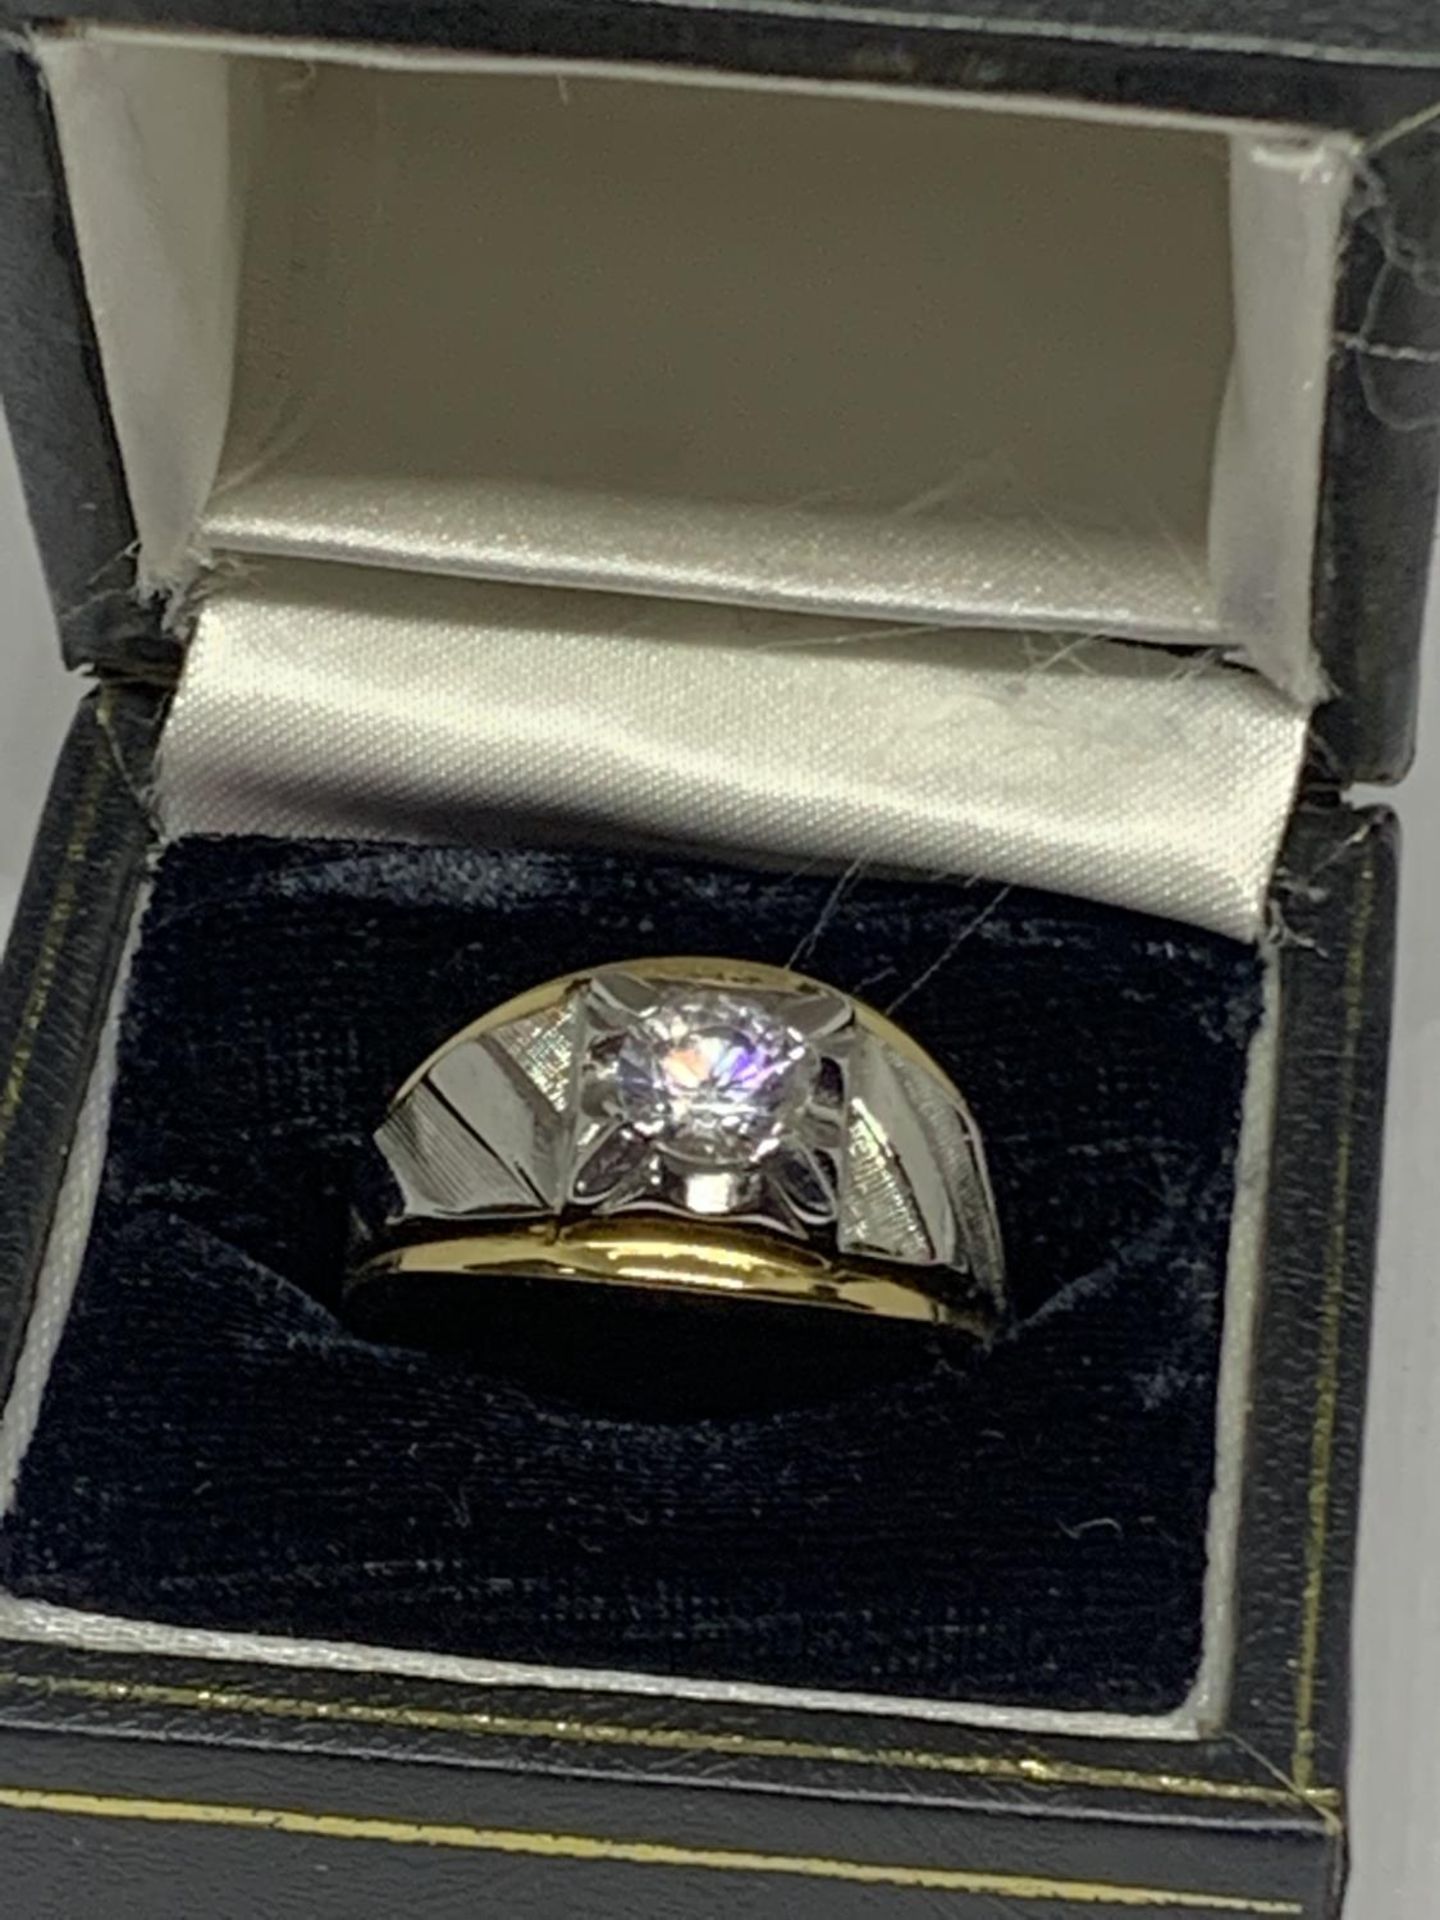 A GENTS RING WITH A CLEAR STONE IN A PRESENTATION BOX - Image 3 of 3